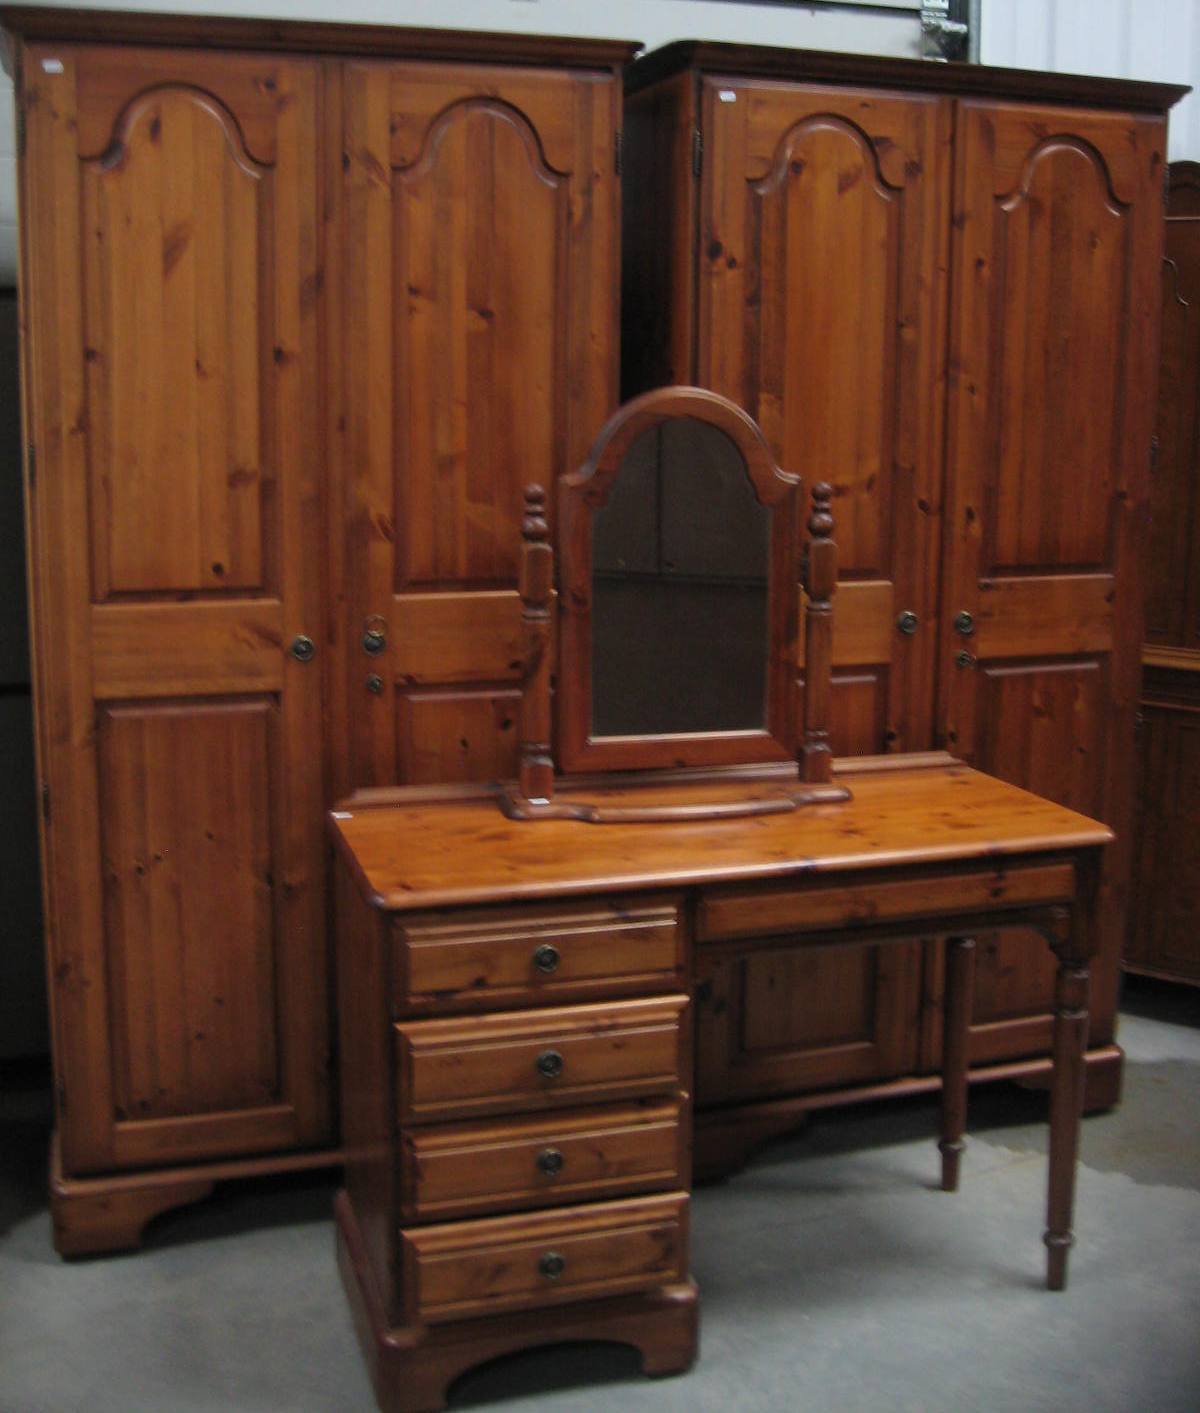 A pair of Ducal pine wardrobes, and a similar dressing table with mirror